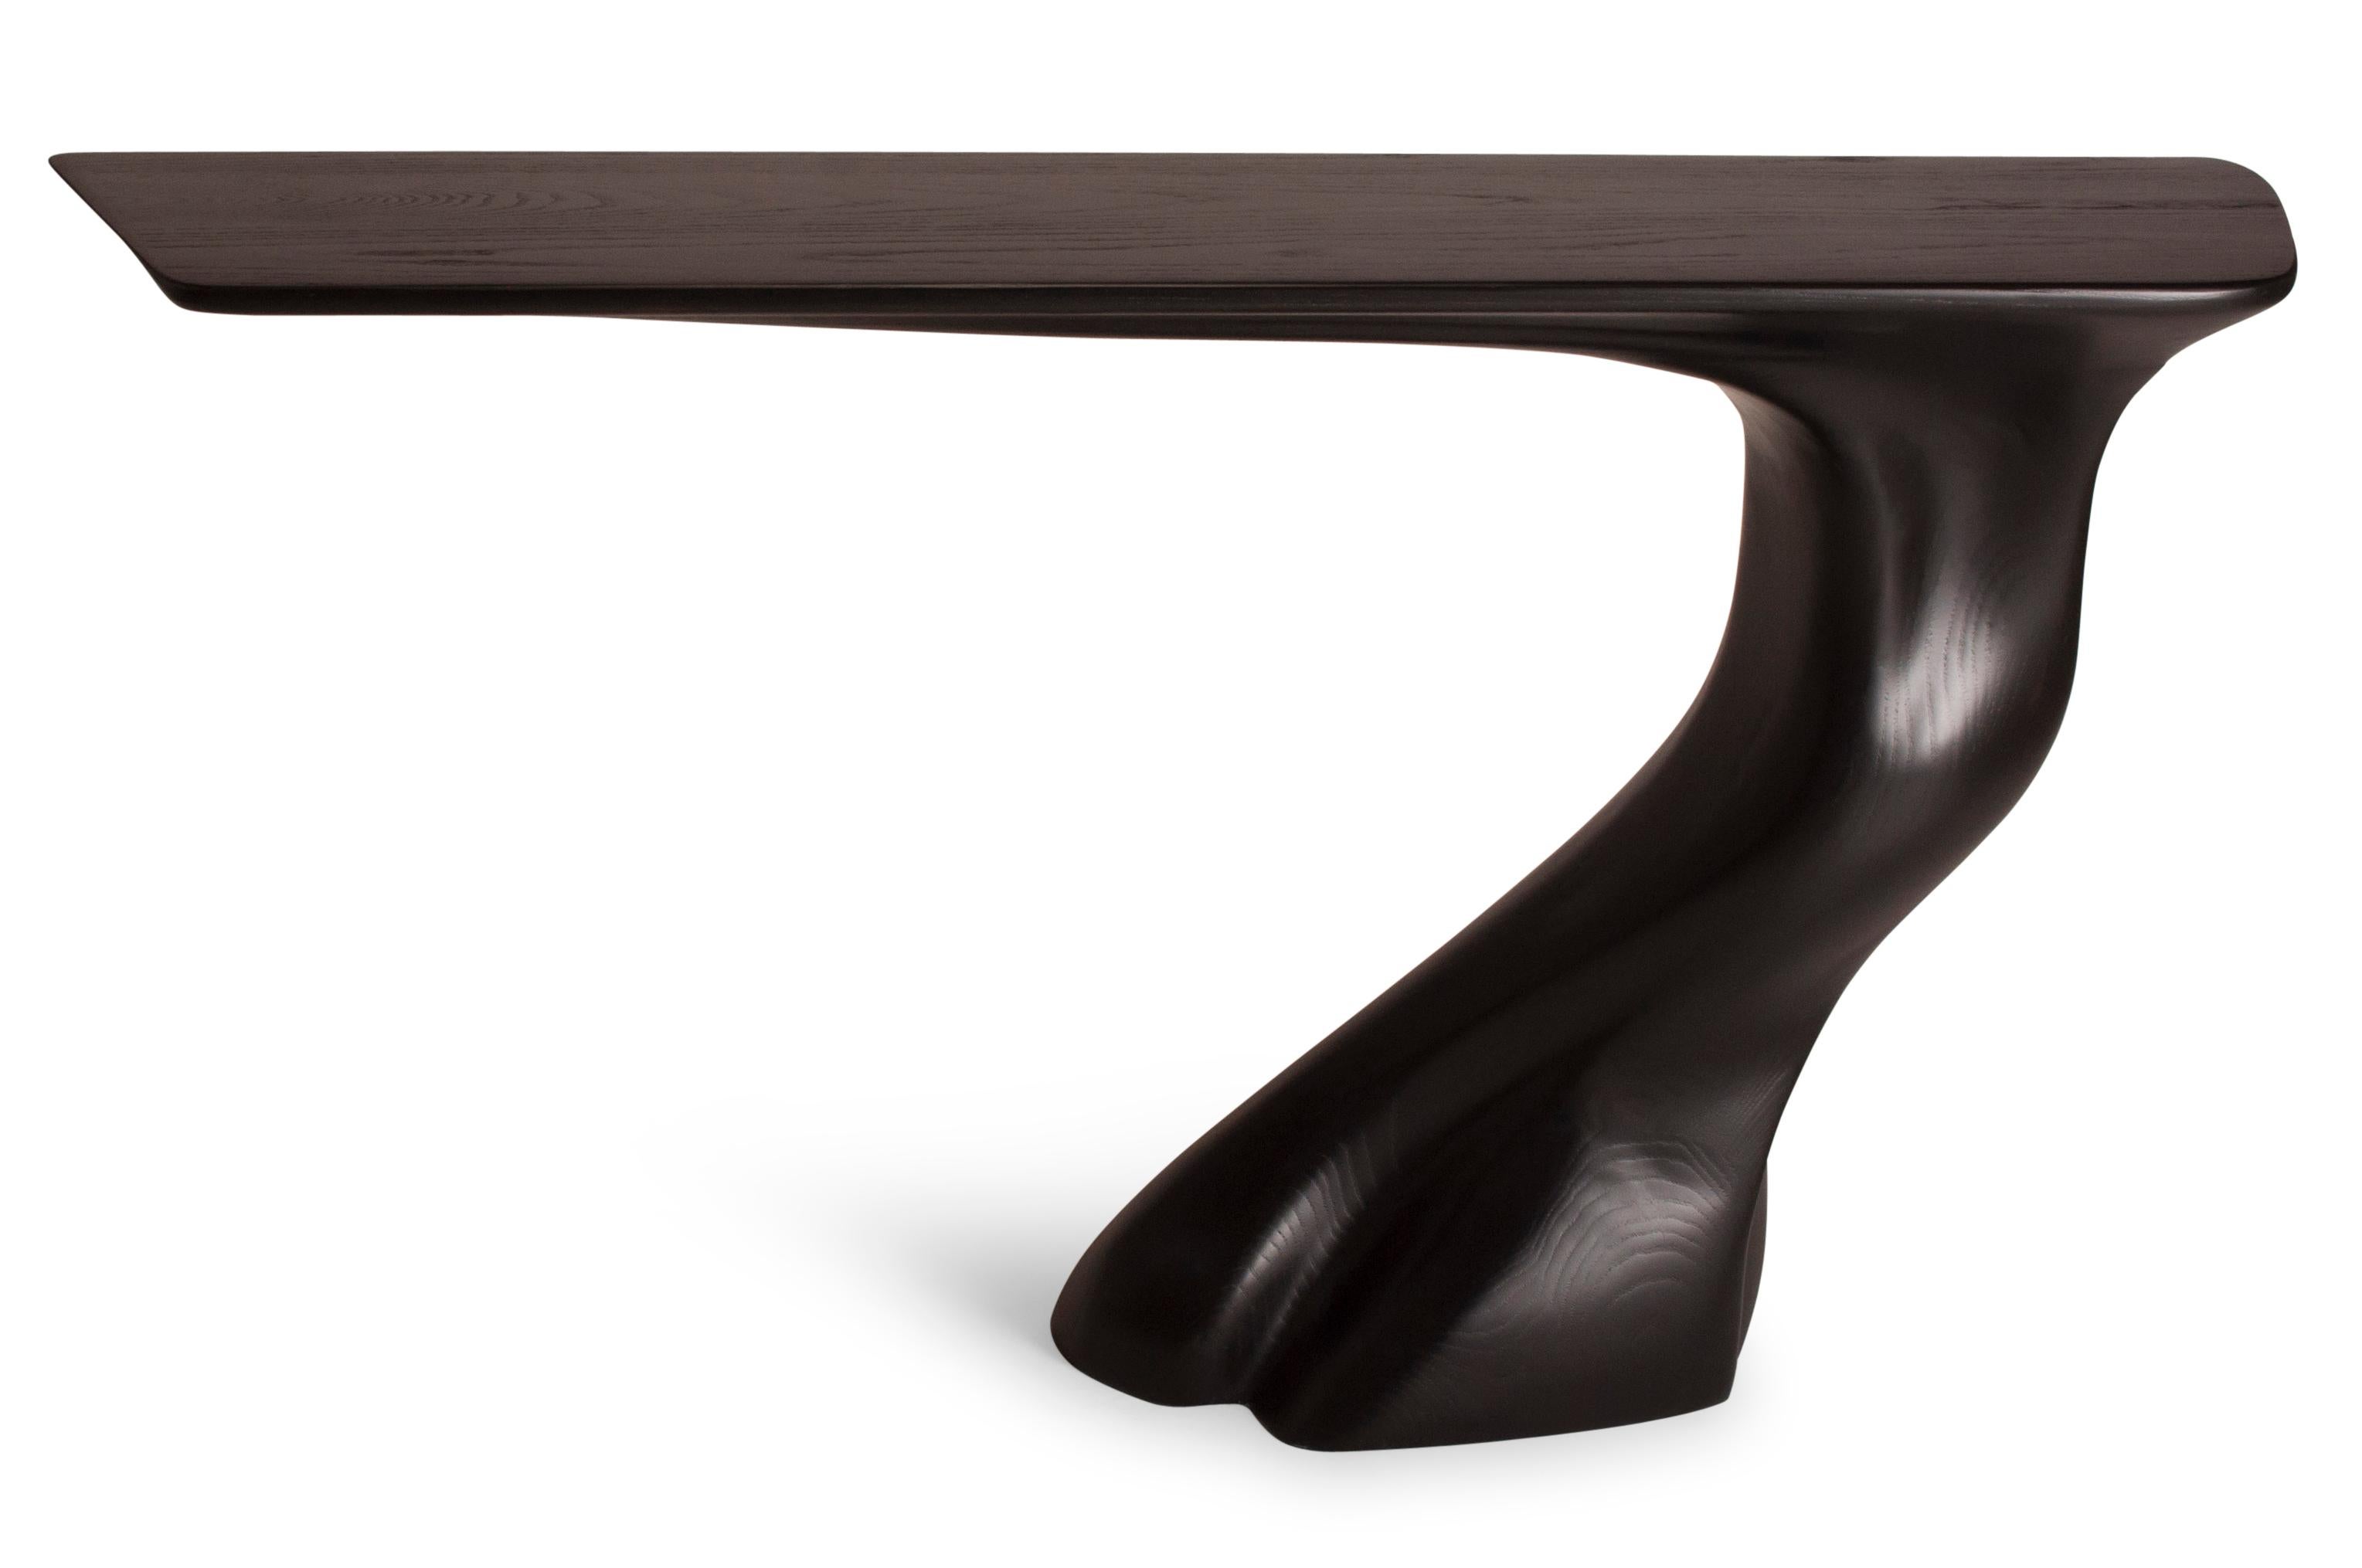 Modern Amorph Frolic wall mounted console in Ebony stain on Ash wood Facing Left For Sale